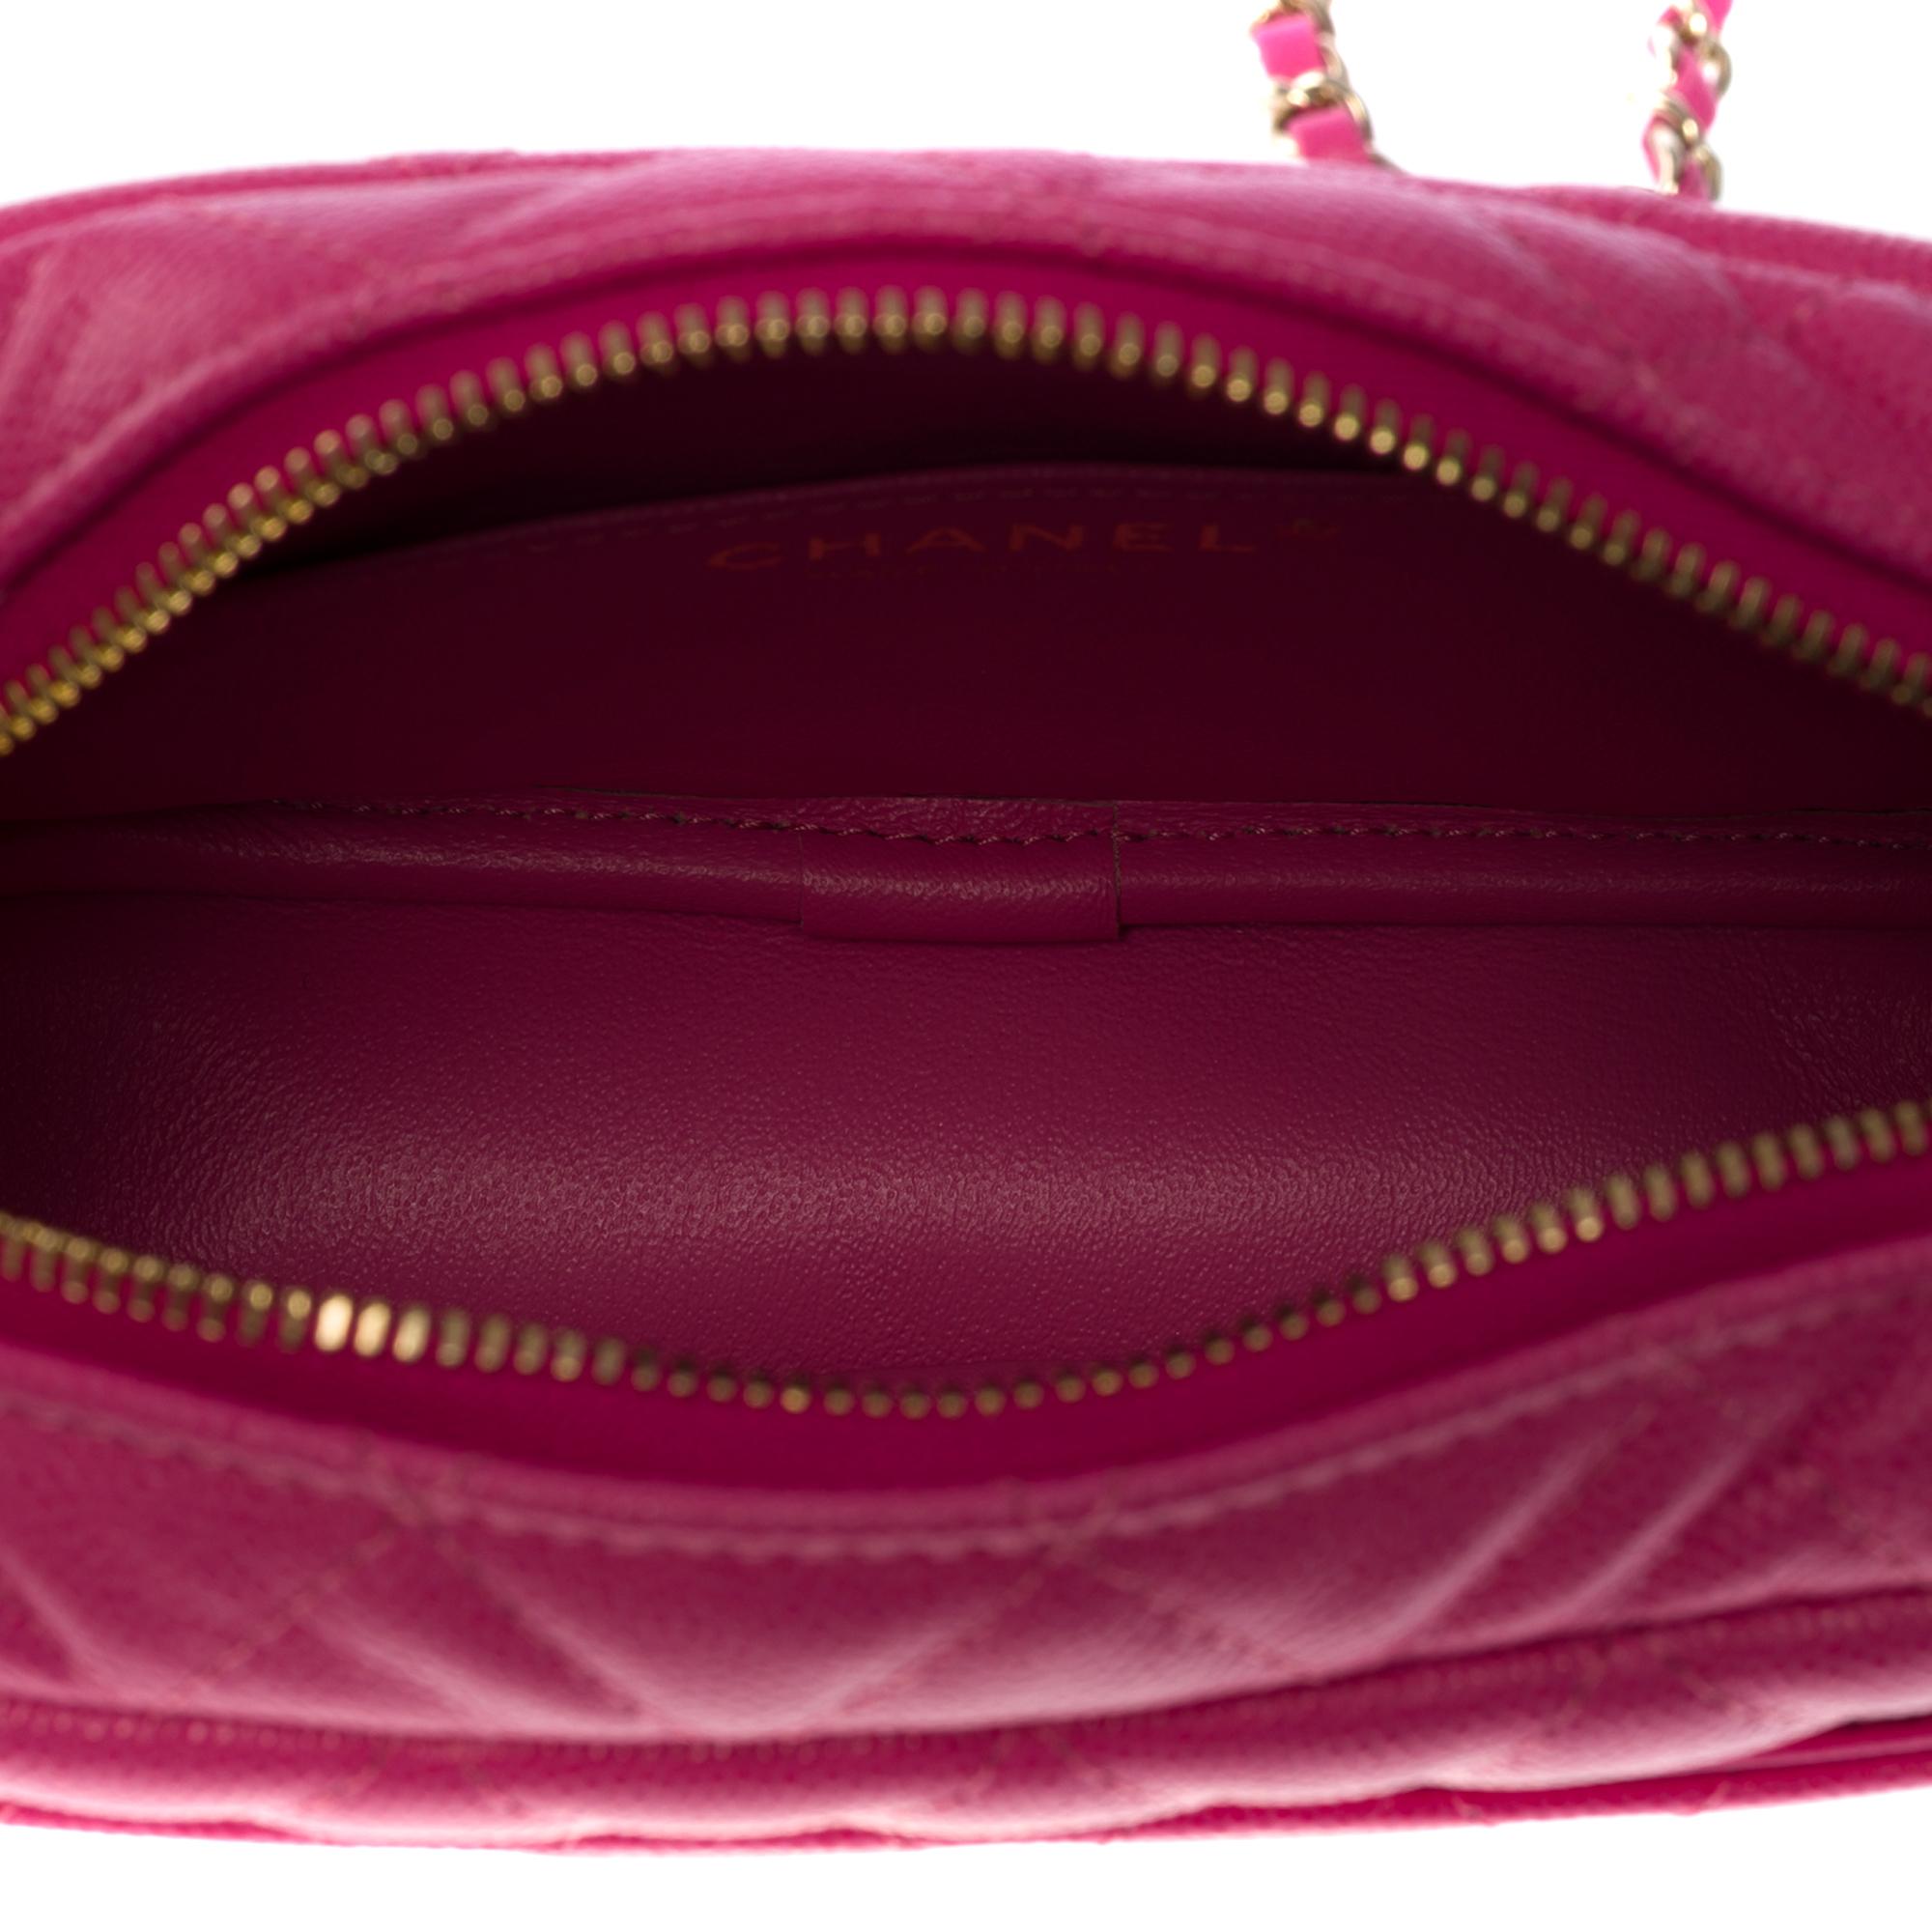 New- Amazing Chanel Mini Camera shoulder bag in Pink caviar leather, CHW 3